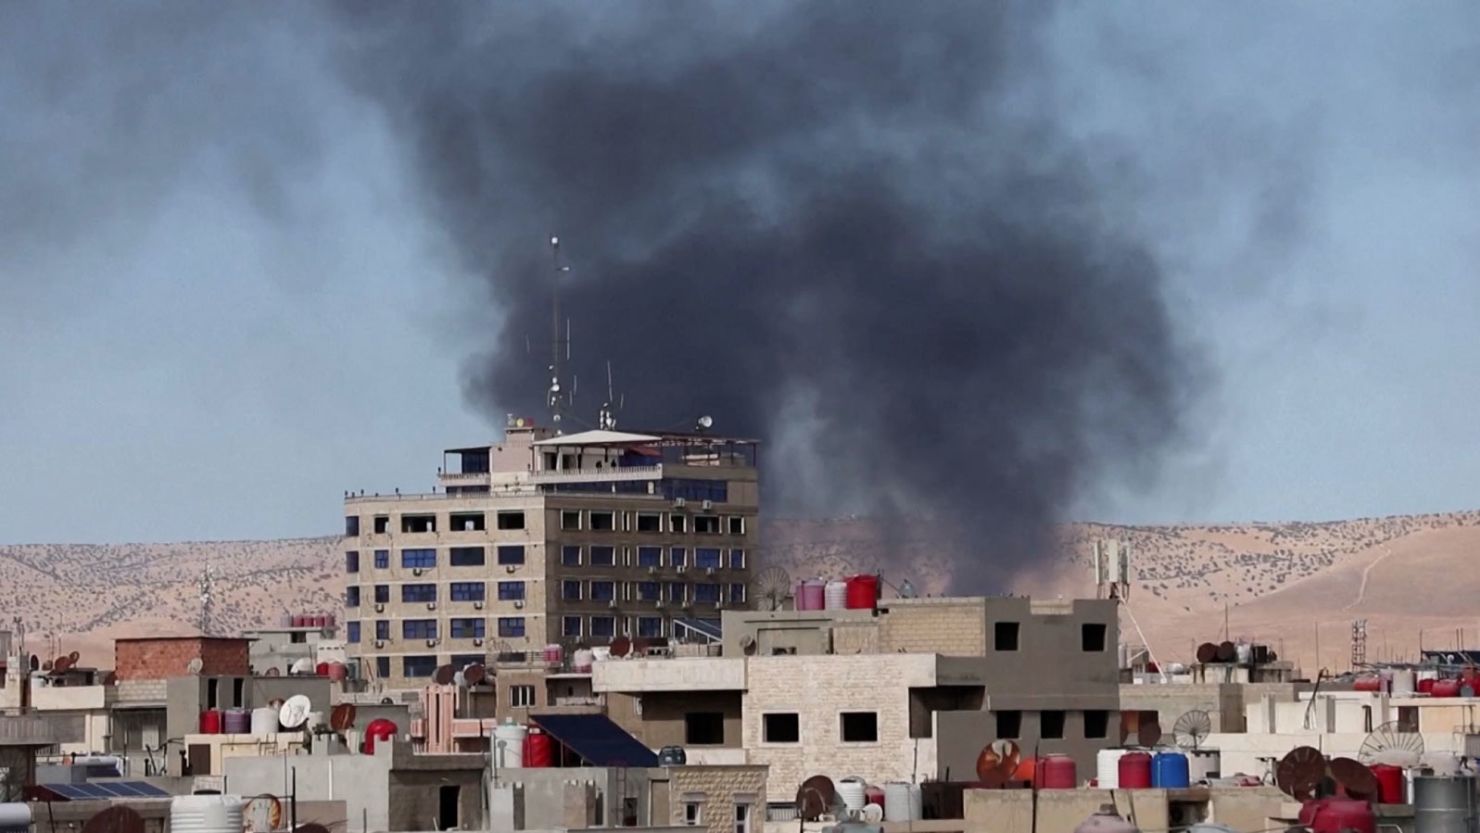 Smoke rises over buildings after a reported strike in Qamishli, Syria.